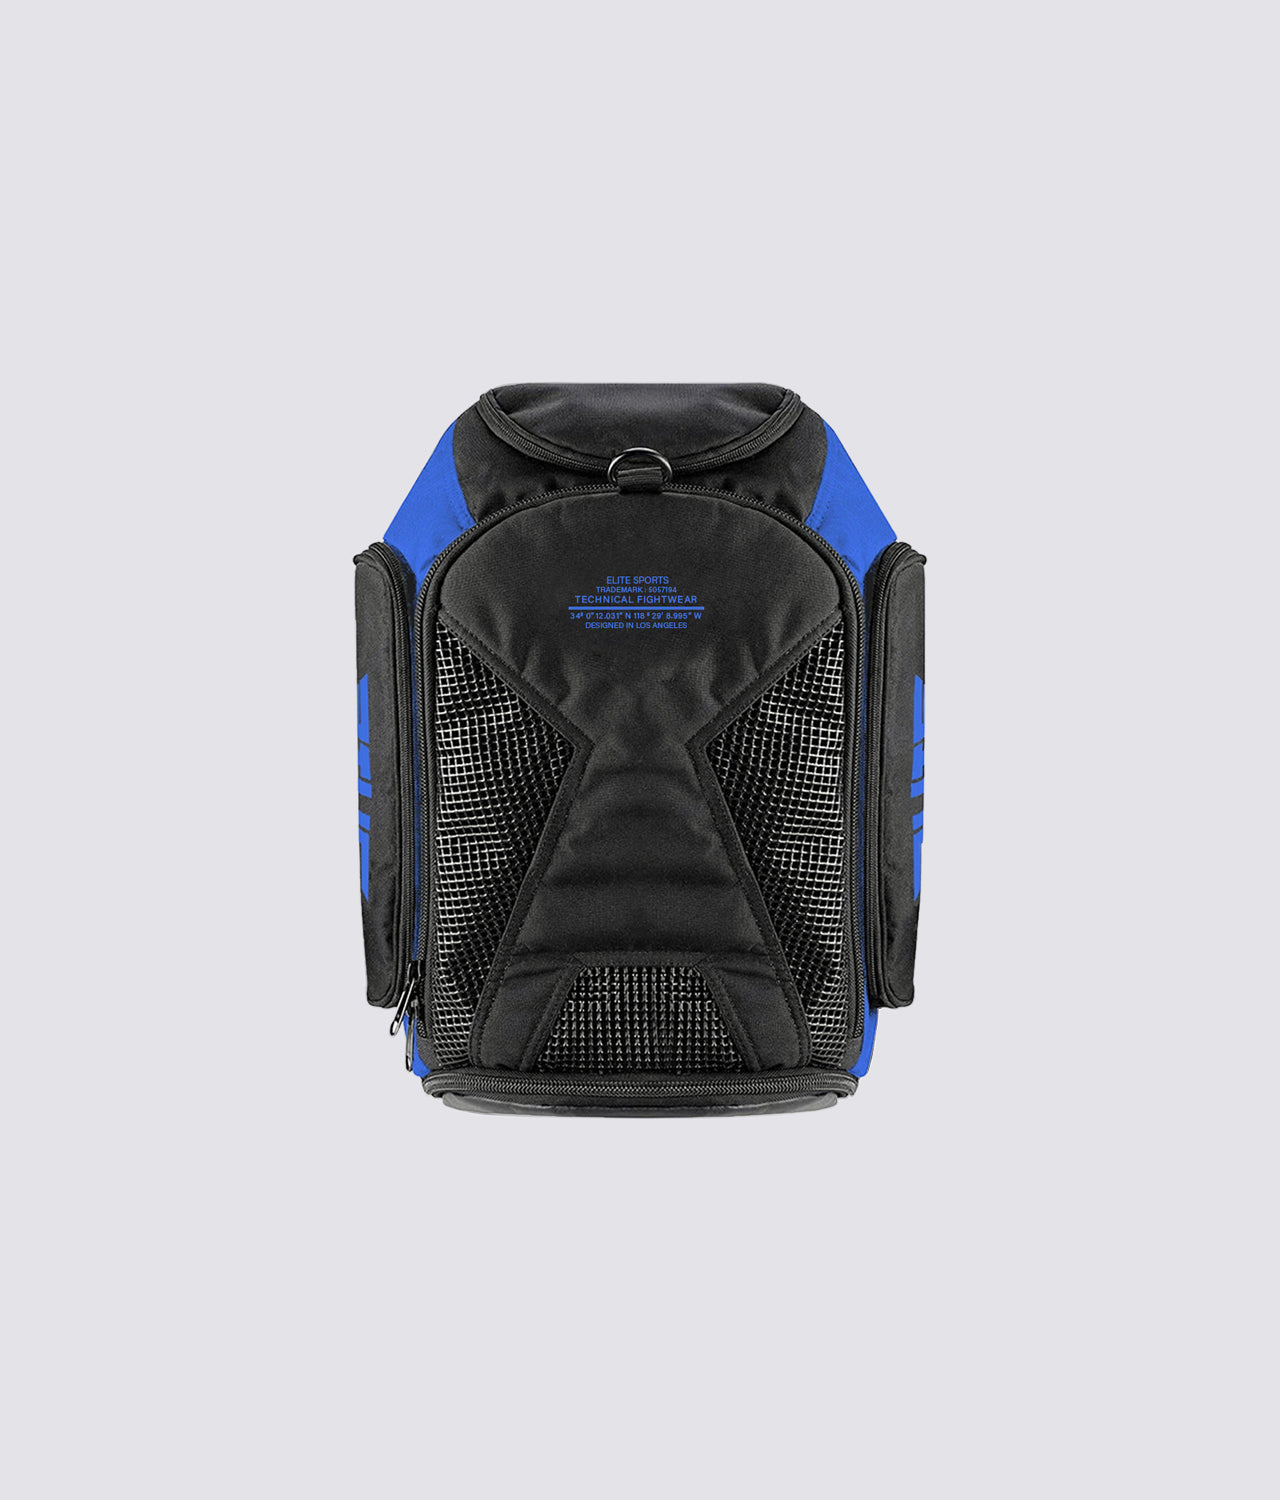 Convertible Blue MMA Gear Gym Bag & Backpack